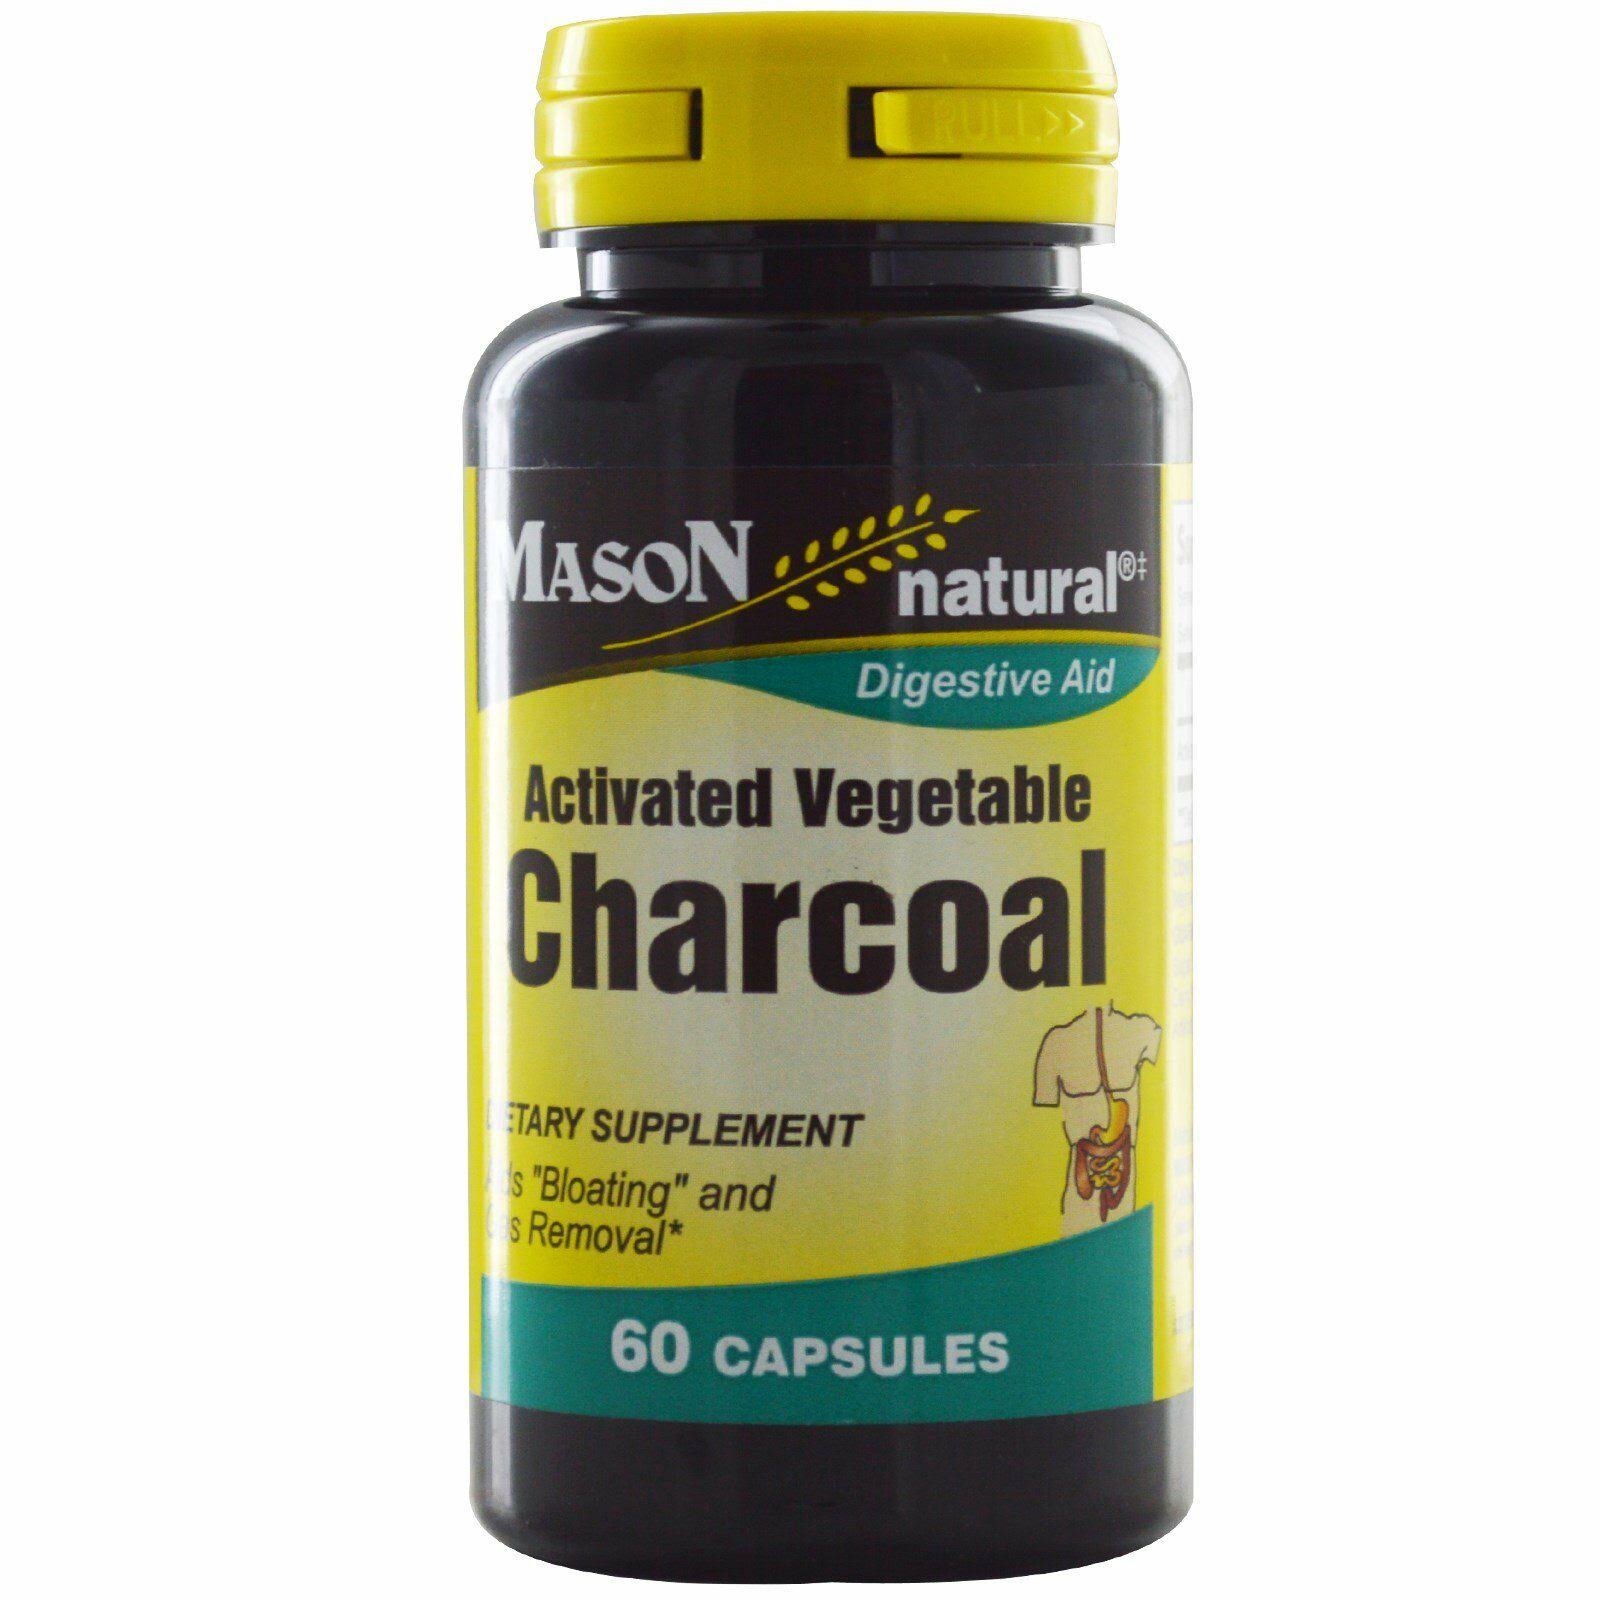 Mason Natural Activated Vegetable Charcoal Capsules - Digestive Aid, 60ct